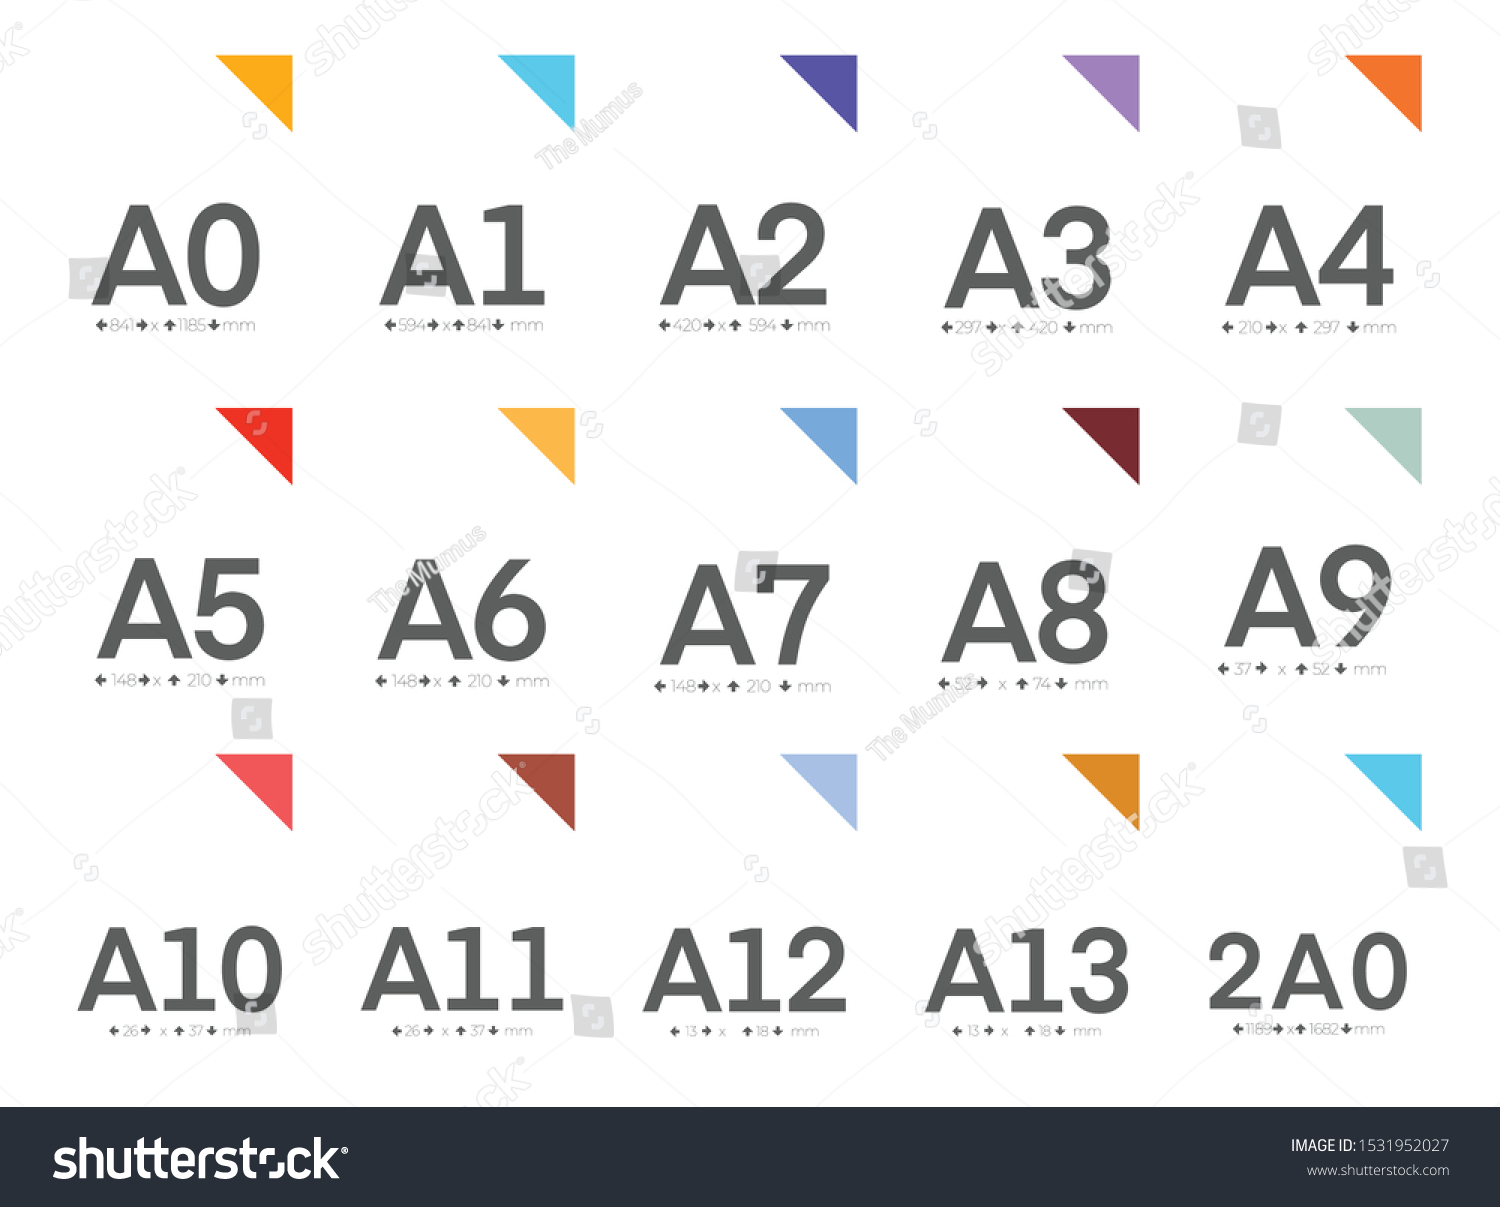 Paper Sizes Paper Sheet Formats A0 A1 A2 A3 Royalty Free Stock Vector 1531952027 4469